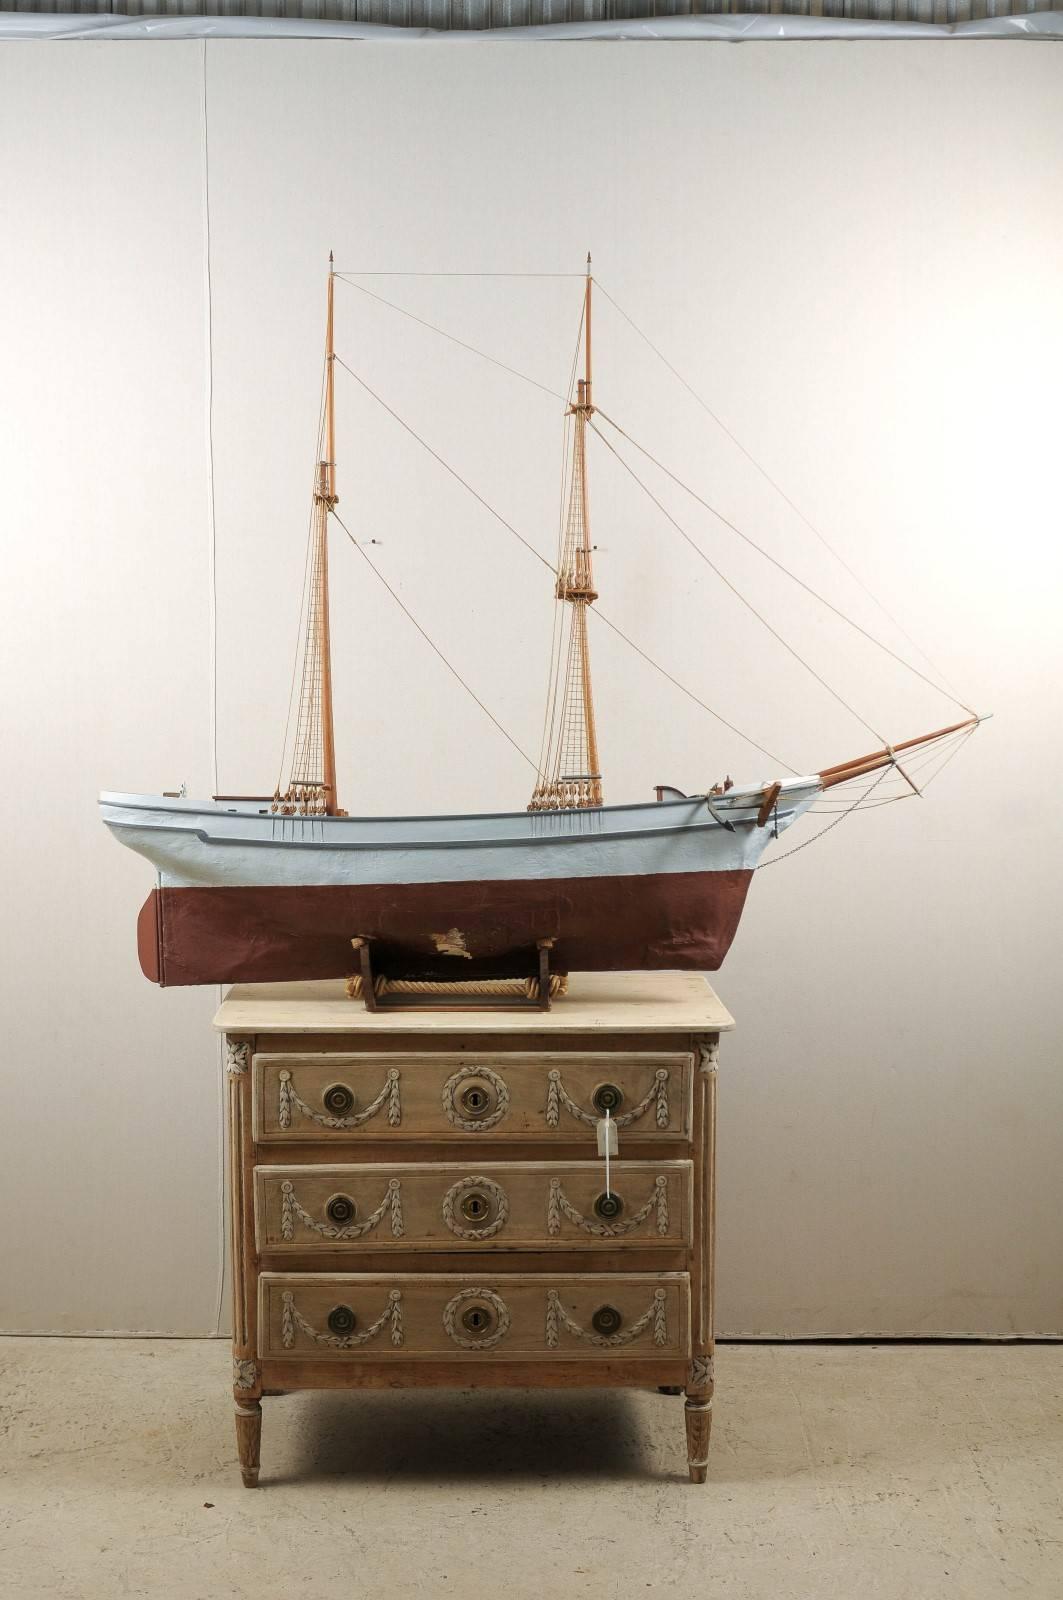 A Swedish two-masted ship model. This Swedish wooden ketch (or brigantine) wooden ship model from the 19th century is raised on a stand. A closer look reveals the minutia in the details, from the masts to the anchor. Nice aging with some wear on the